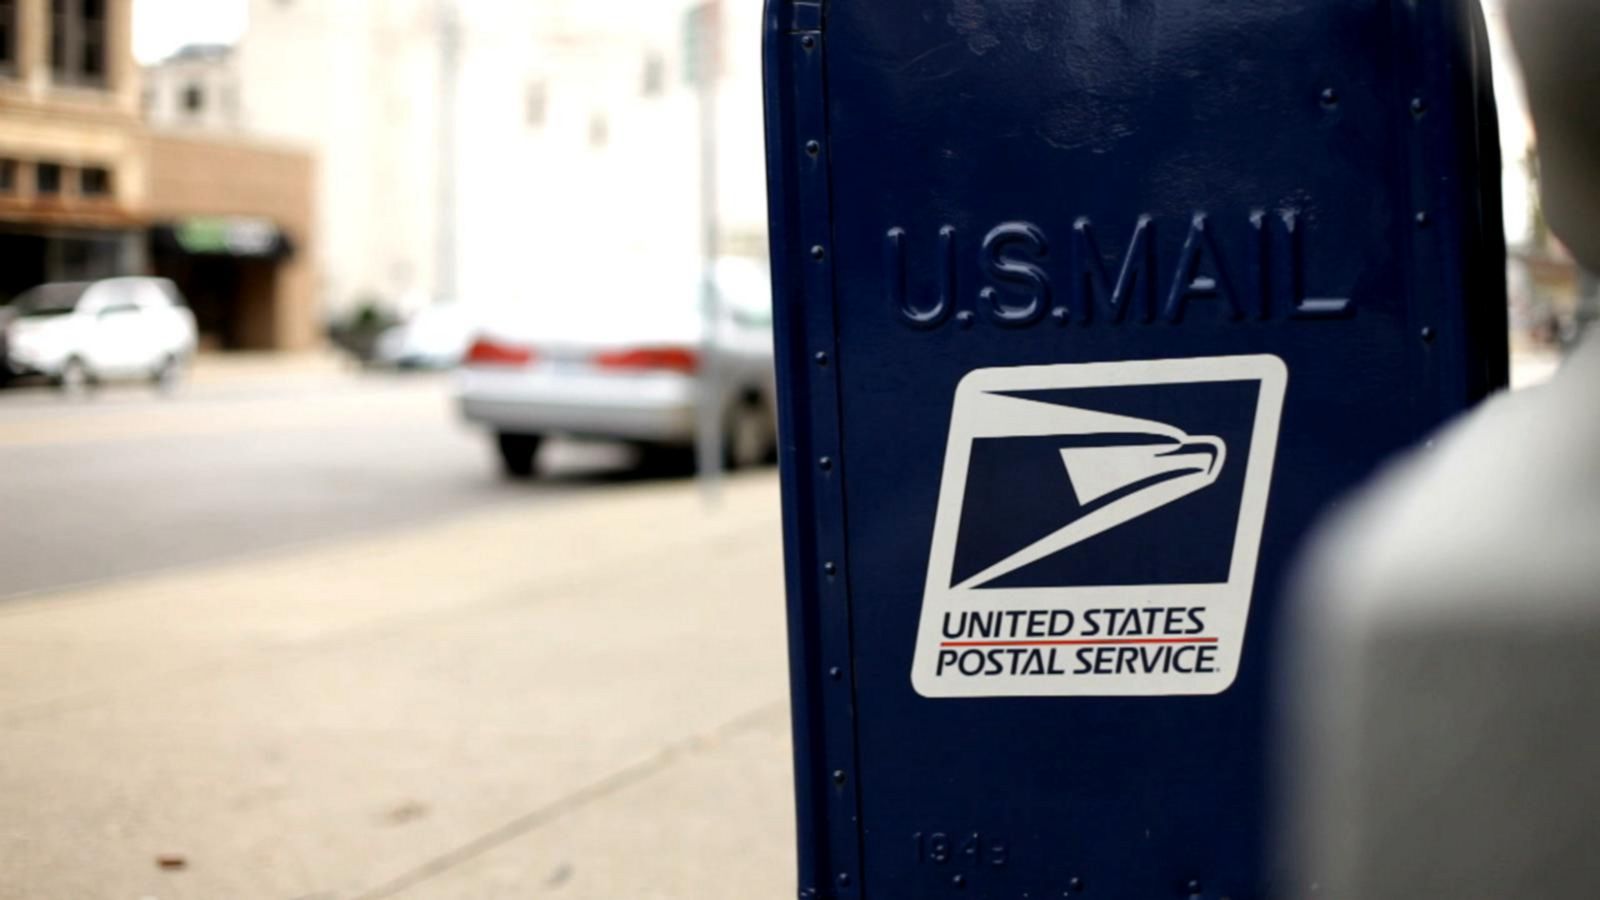 NAACP files lawsuit against USPS Good Morning America